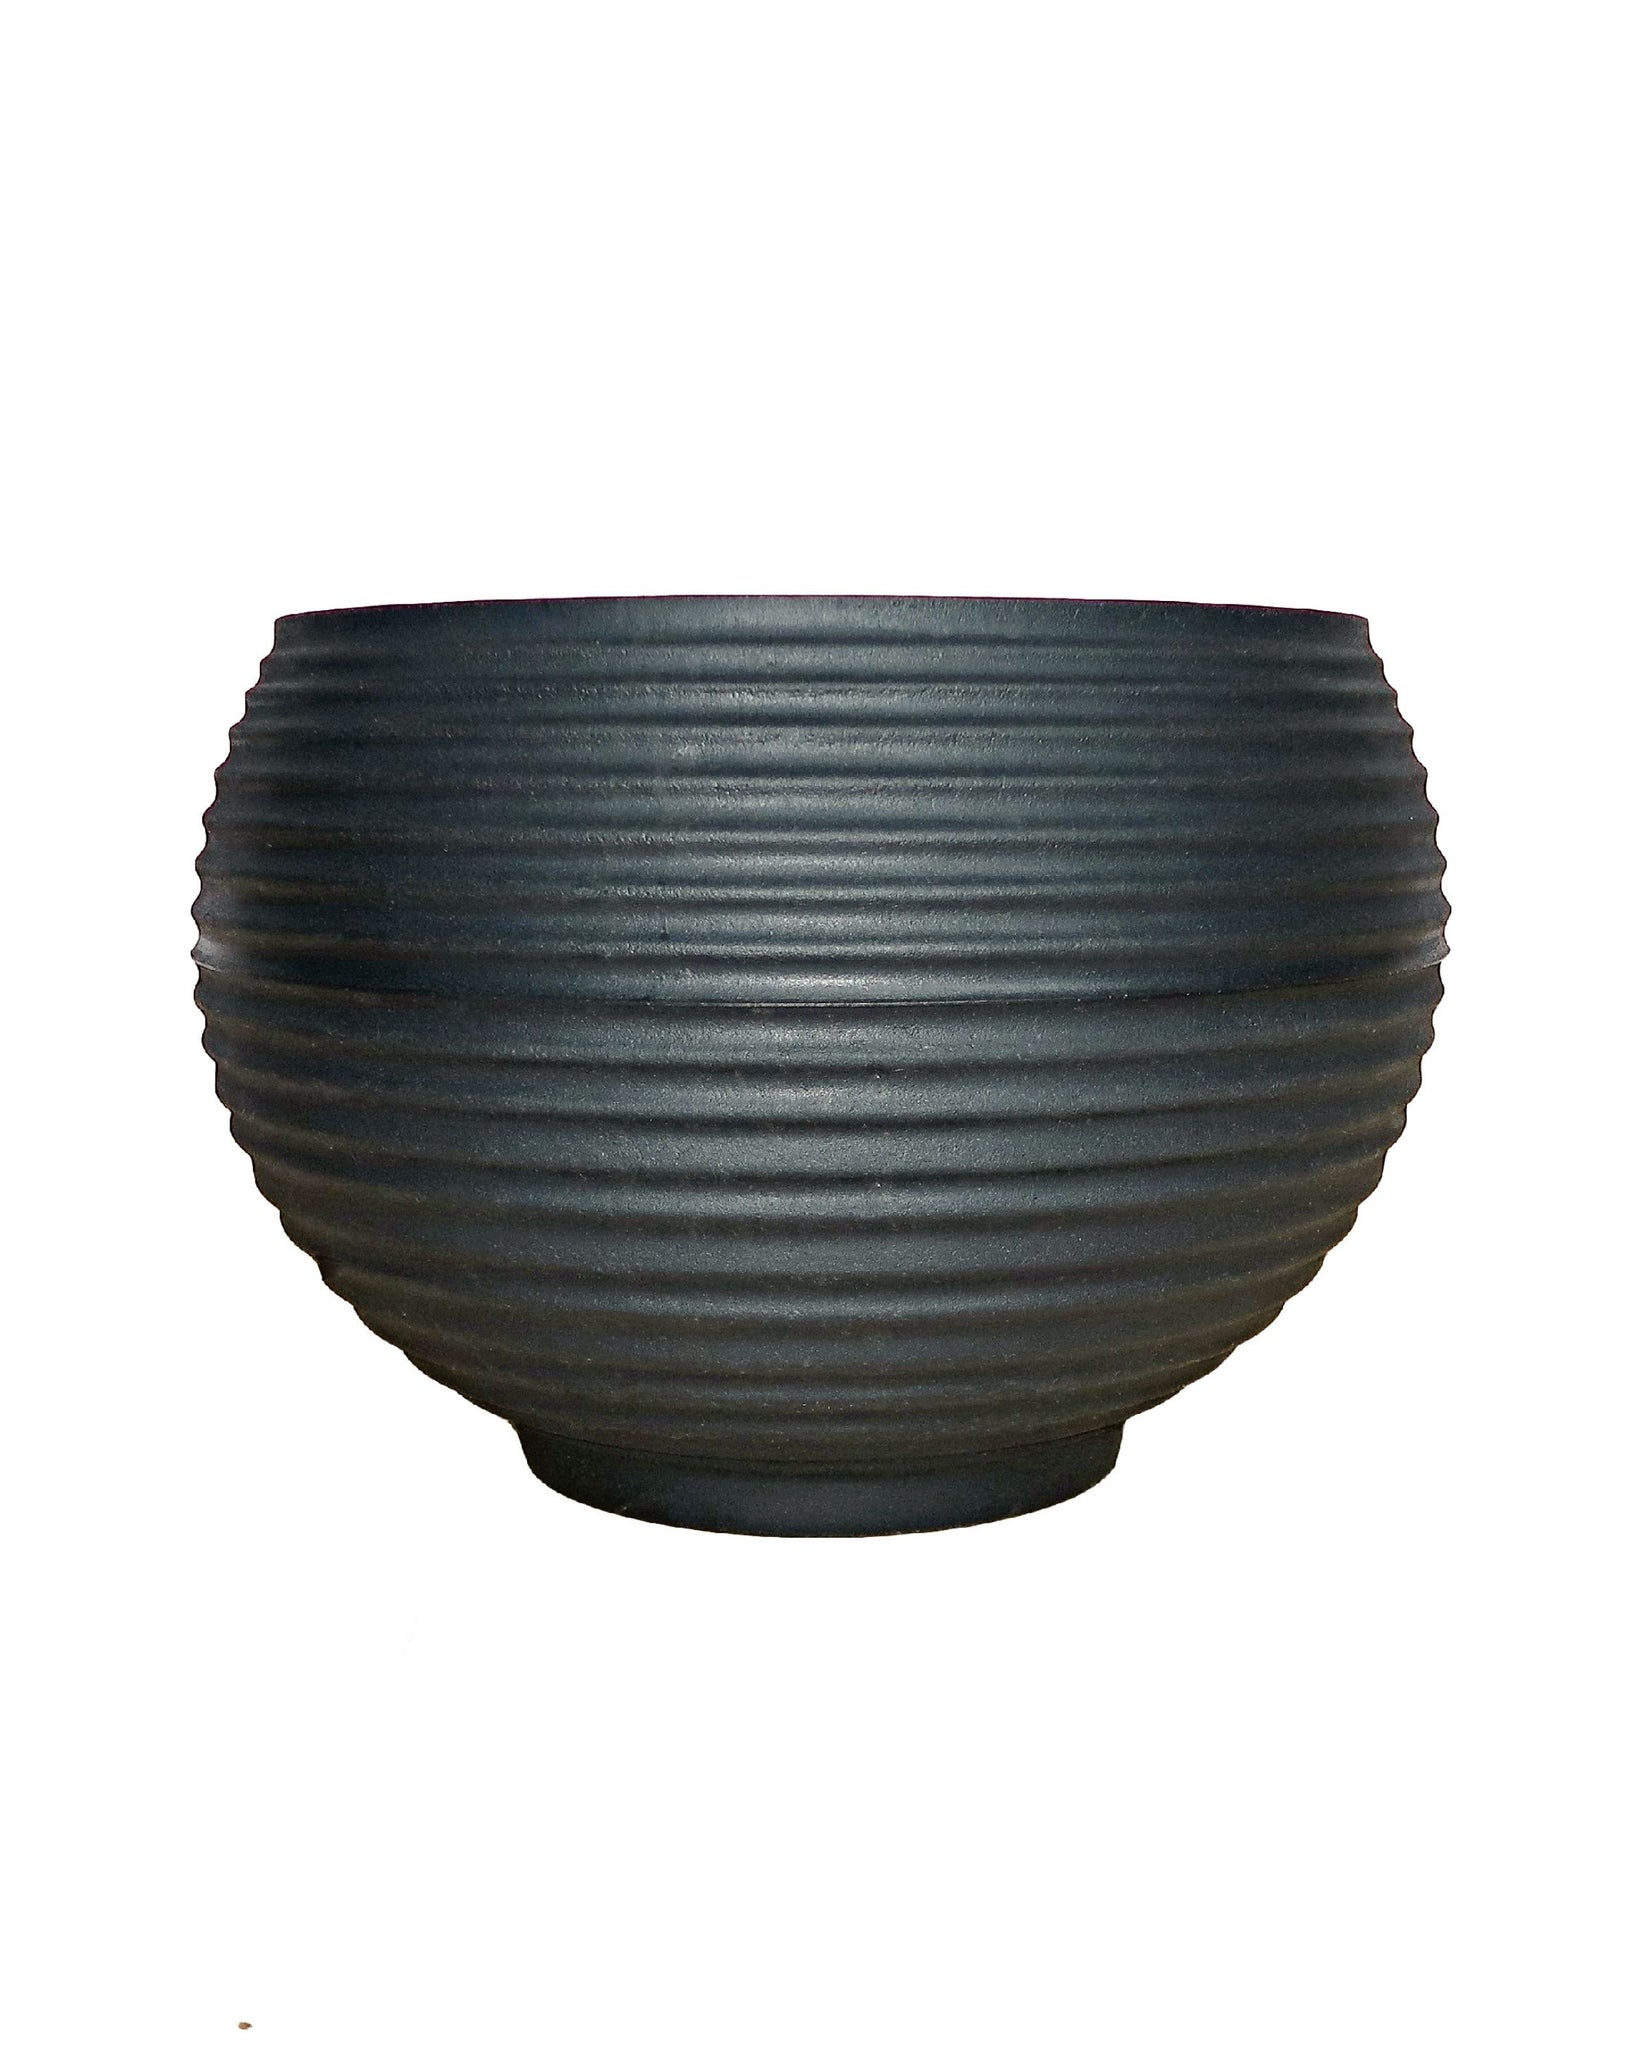 Side view of the round lattice Japi bowl showing the horizontal lines in the design. The bowl comes in one colour being Lead (black)